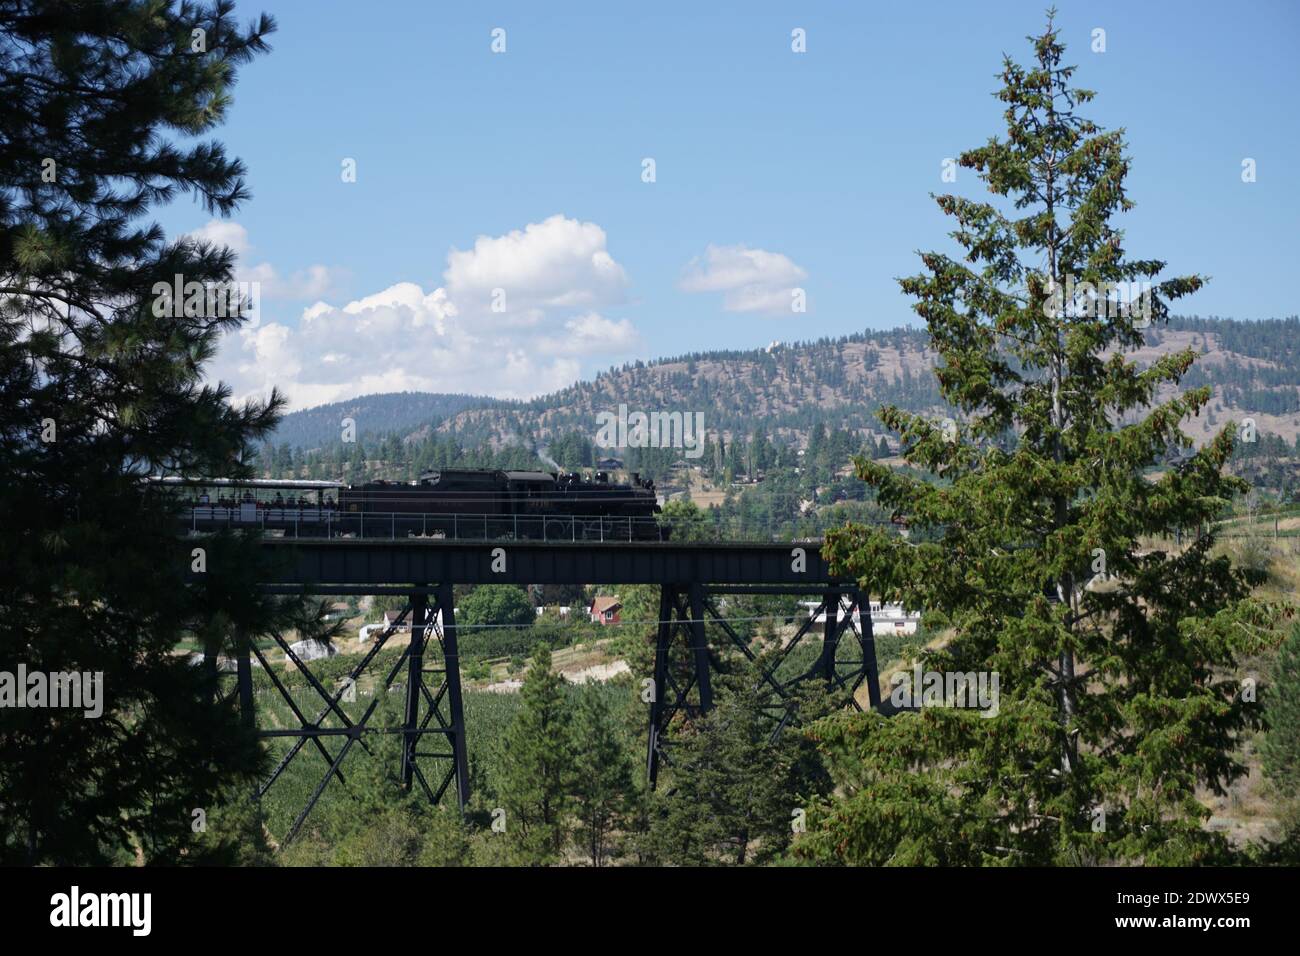 Kettle Valley Steam train in Summerland, BC, Canada. Stock Photo